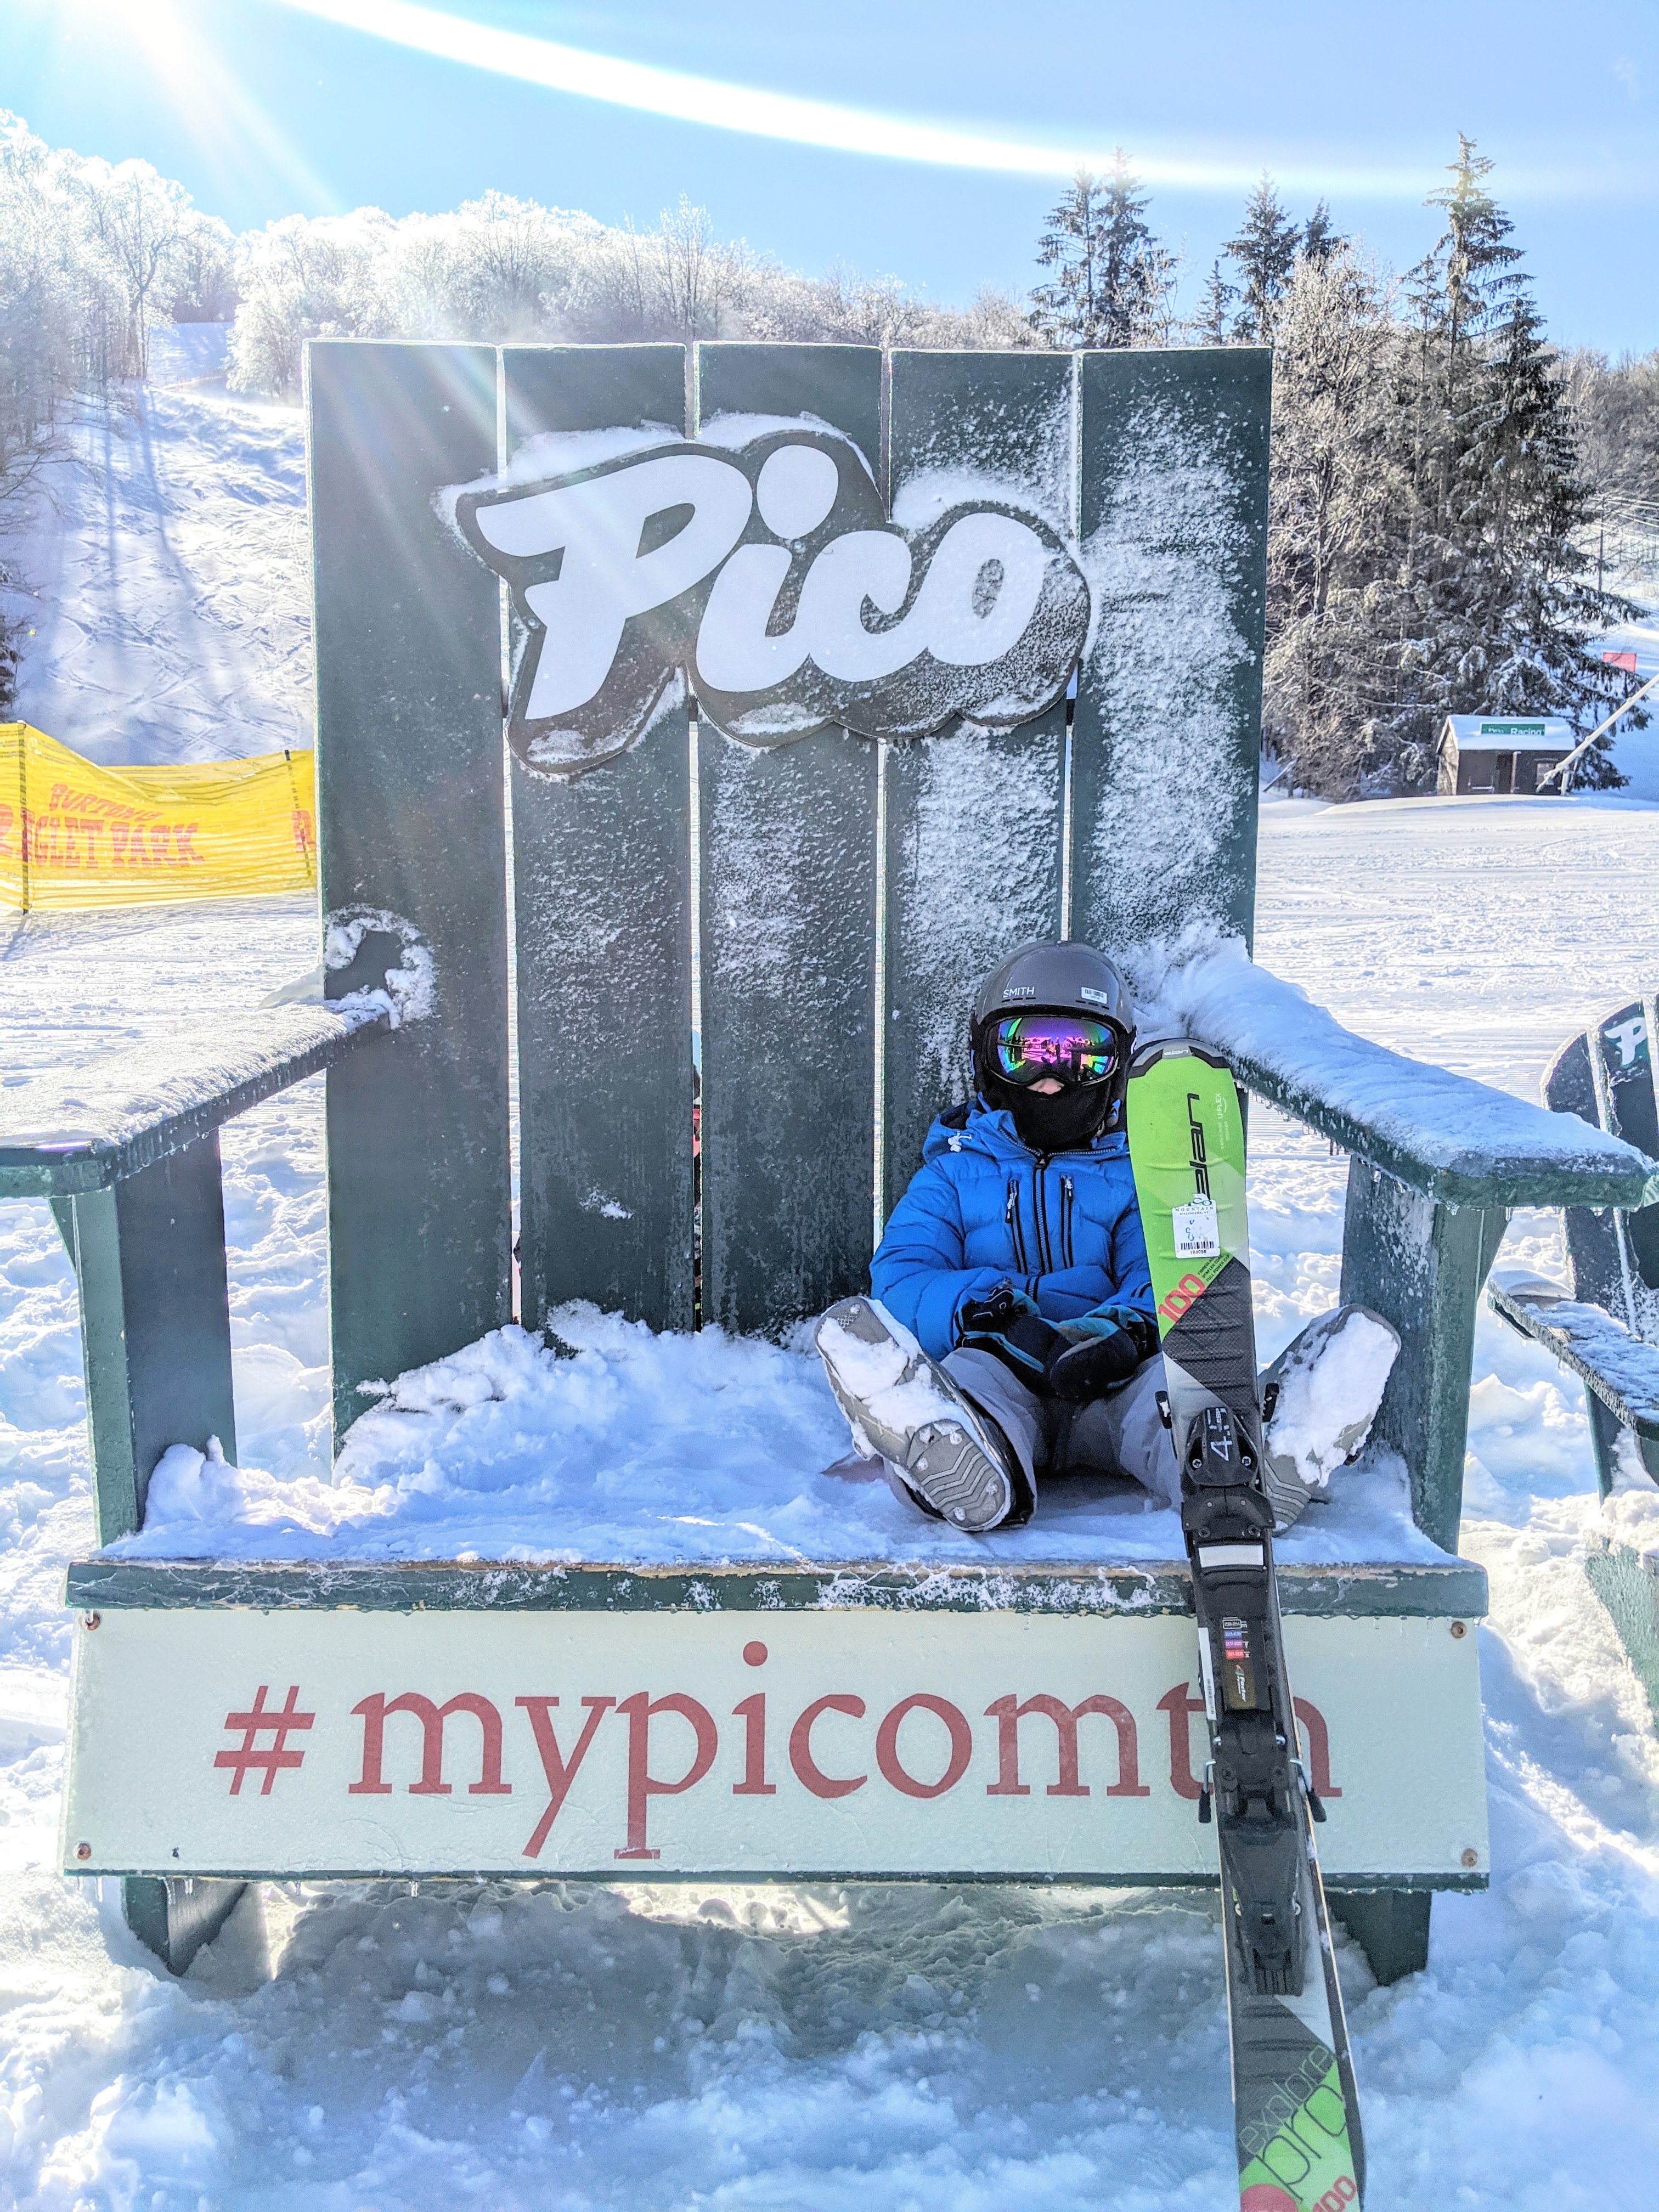 Pico Mountain is that hidden gem you snow bunnies been looking for